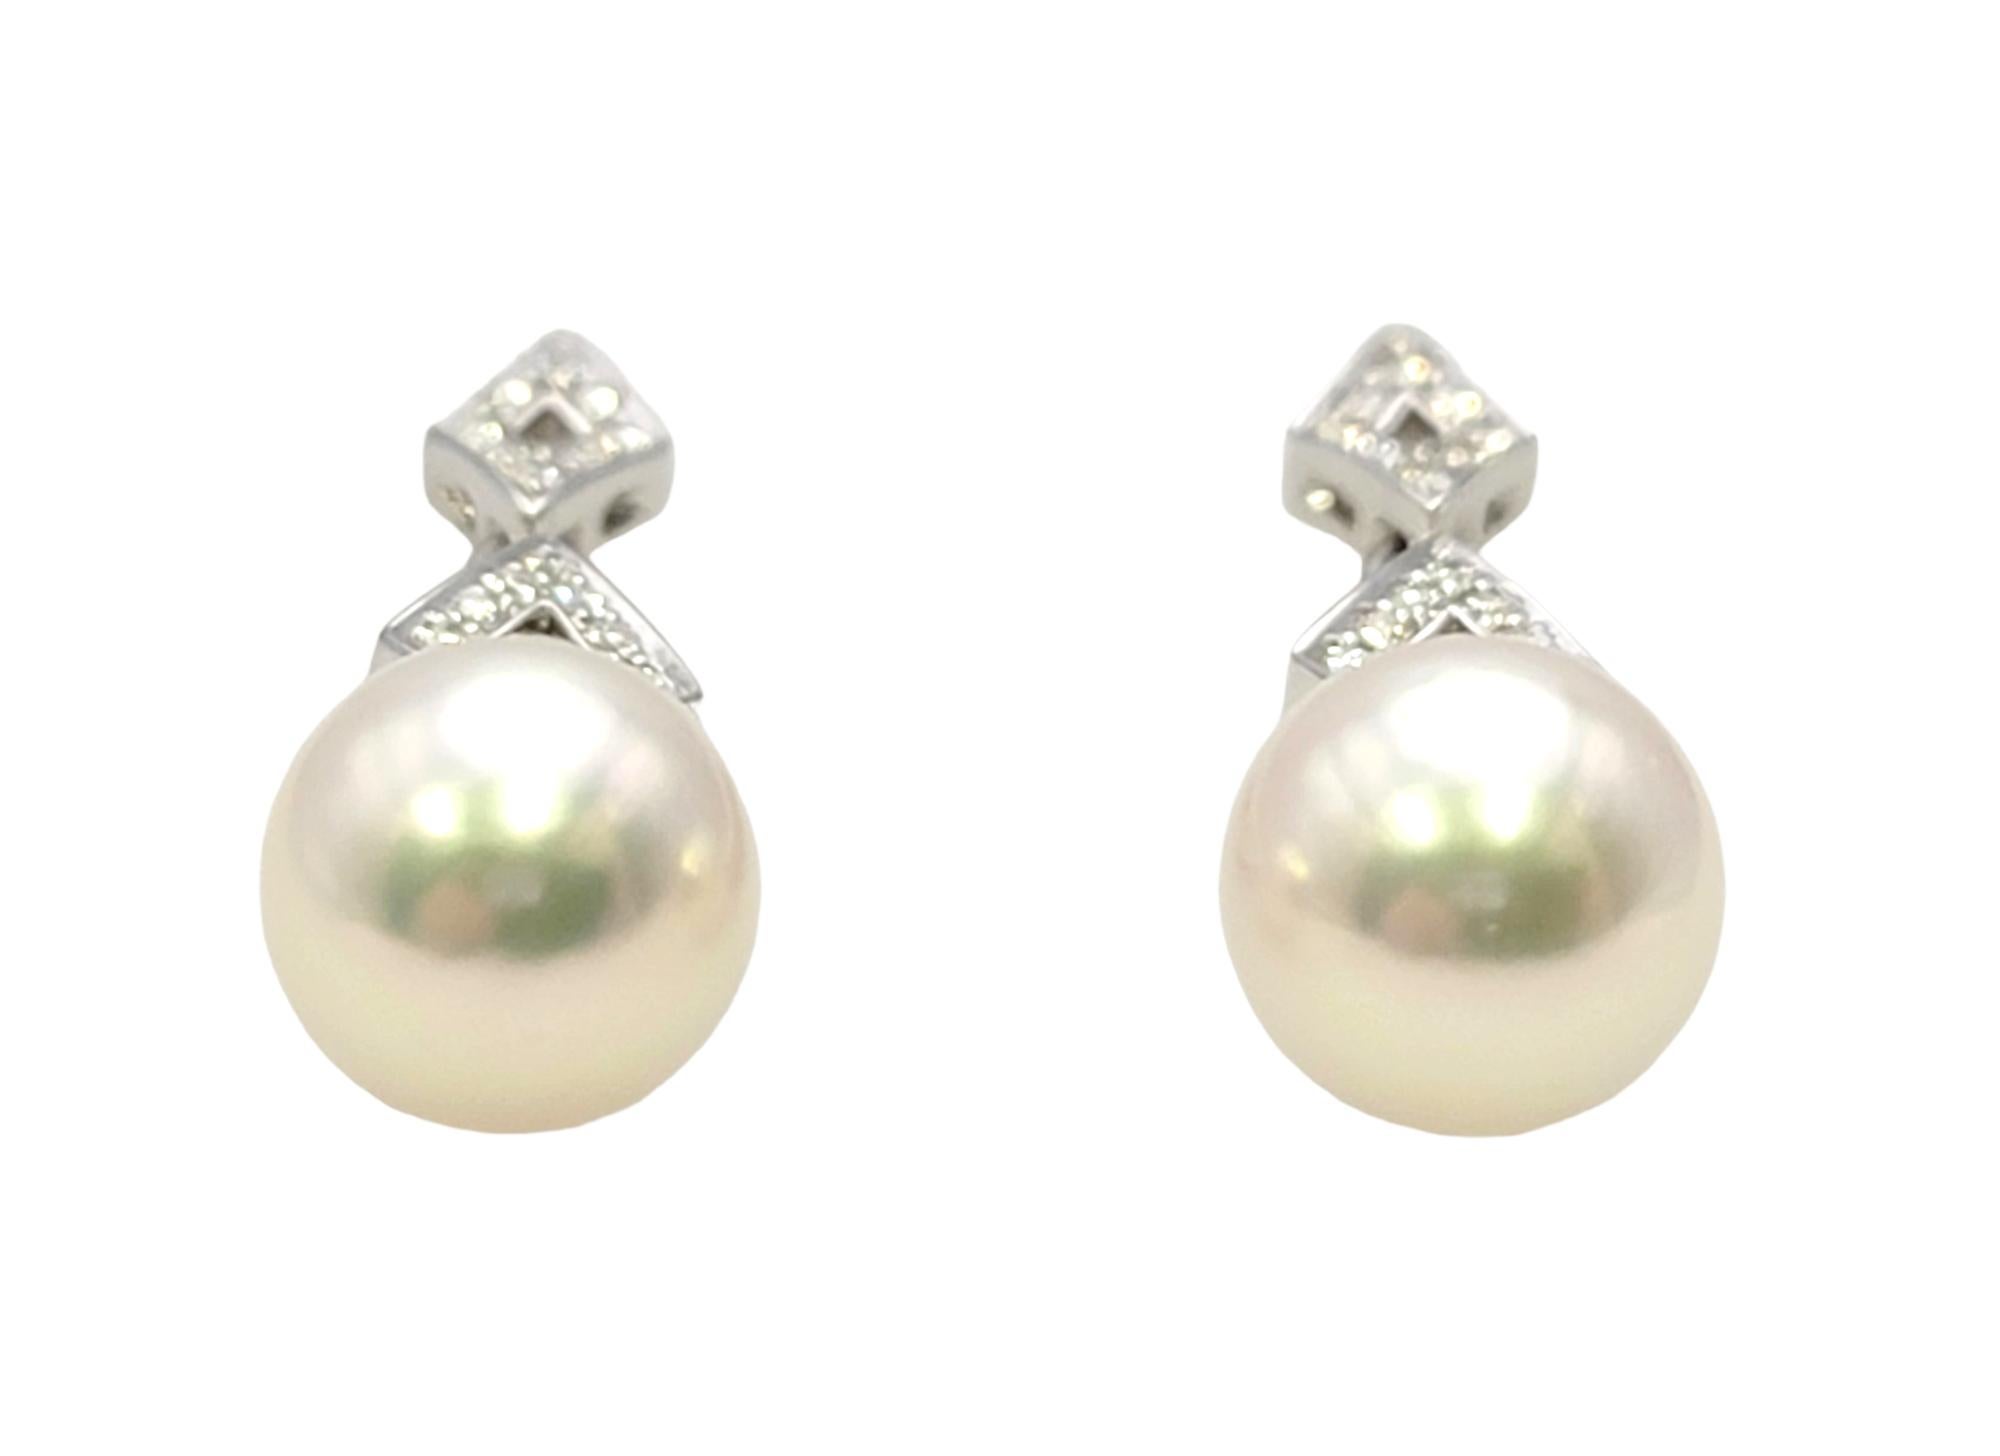 Utterly timeless diamond and pearl earrings by renowned jeweler, Mikimoto. Mikimoto is an international luxury company, recognized as the first producer of cultured pearl jewelry. The worldwide brand is known for its superior craftsmanship,